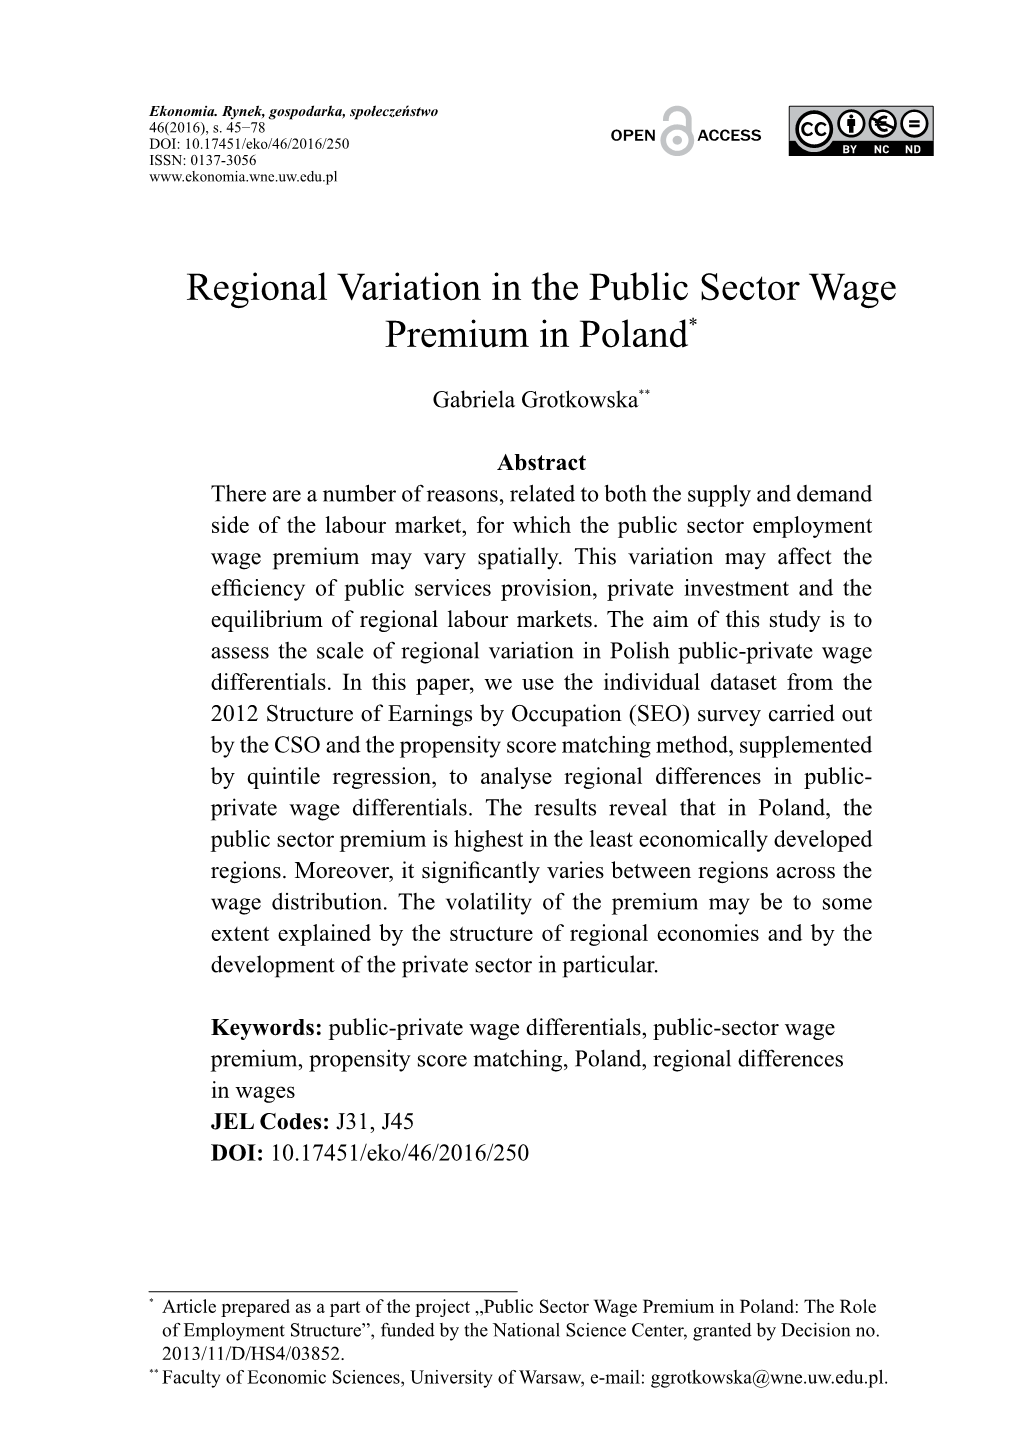 Regional Variation in the Public Sector Wage Premium in Poland*